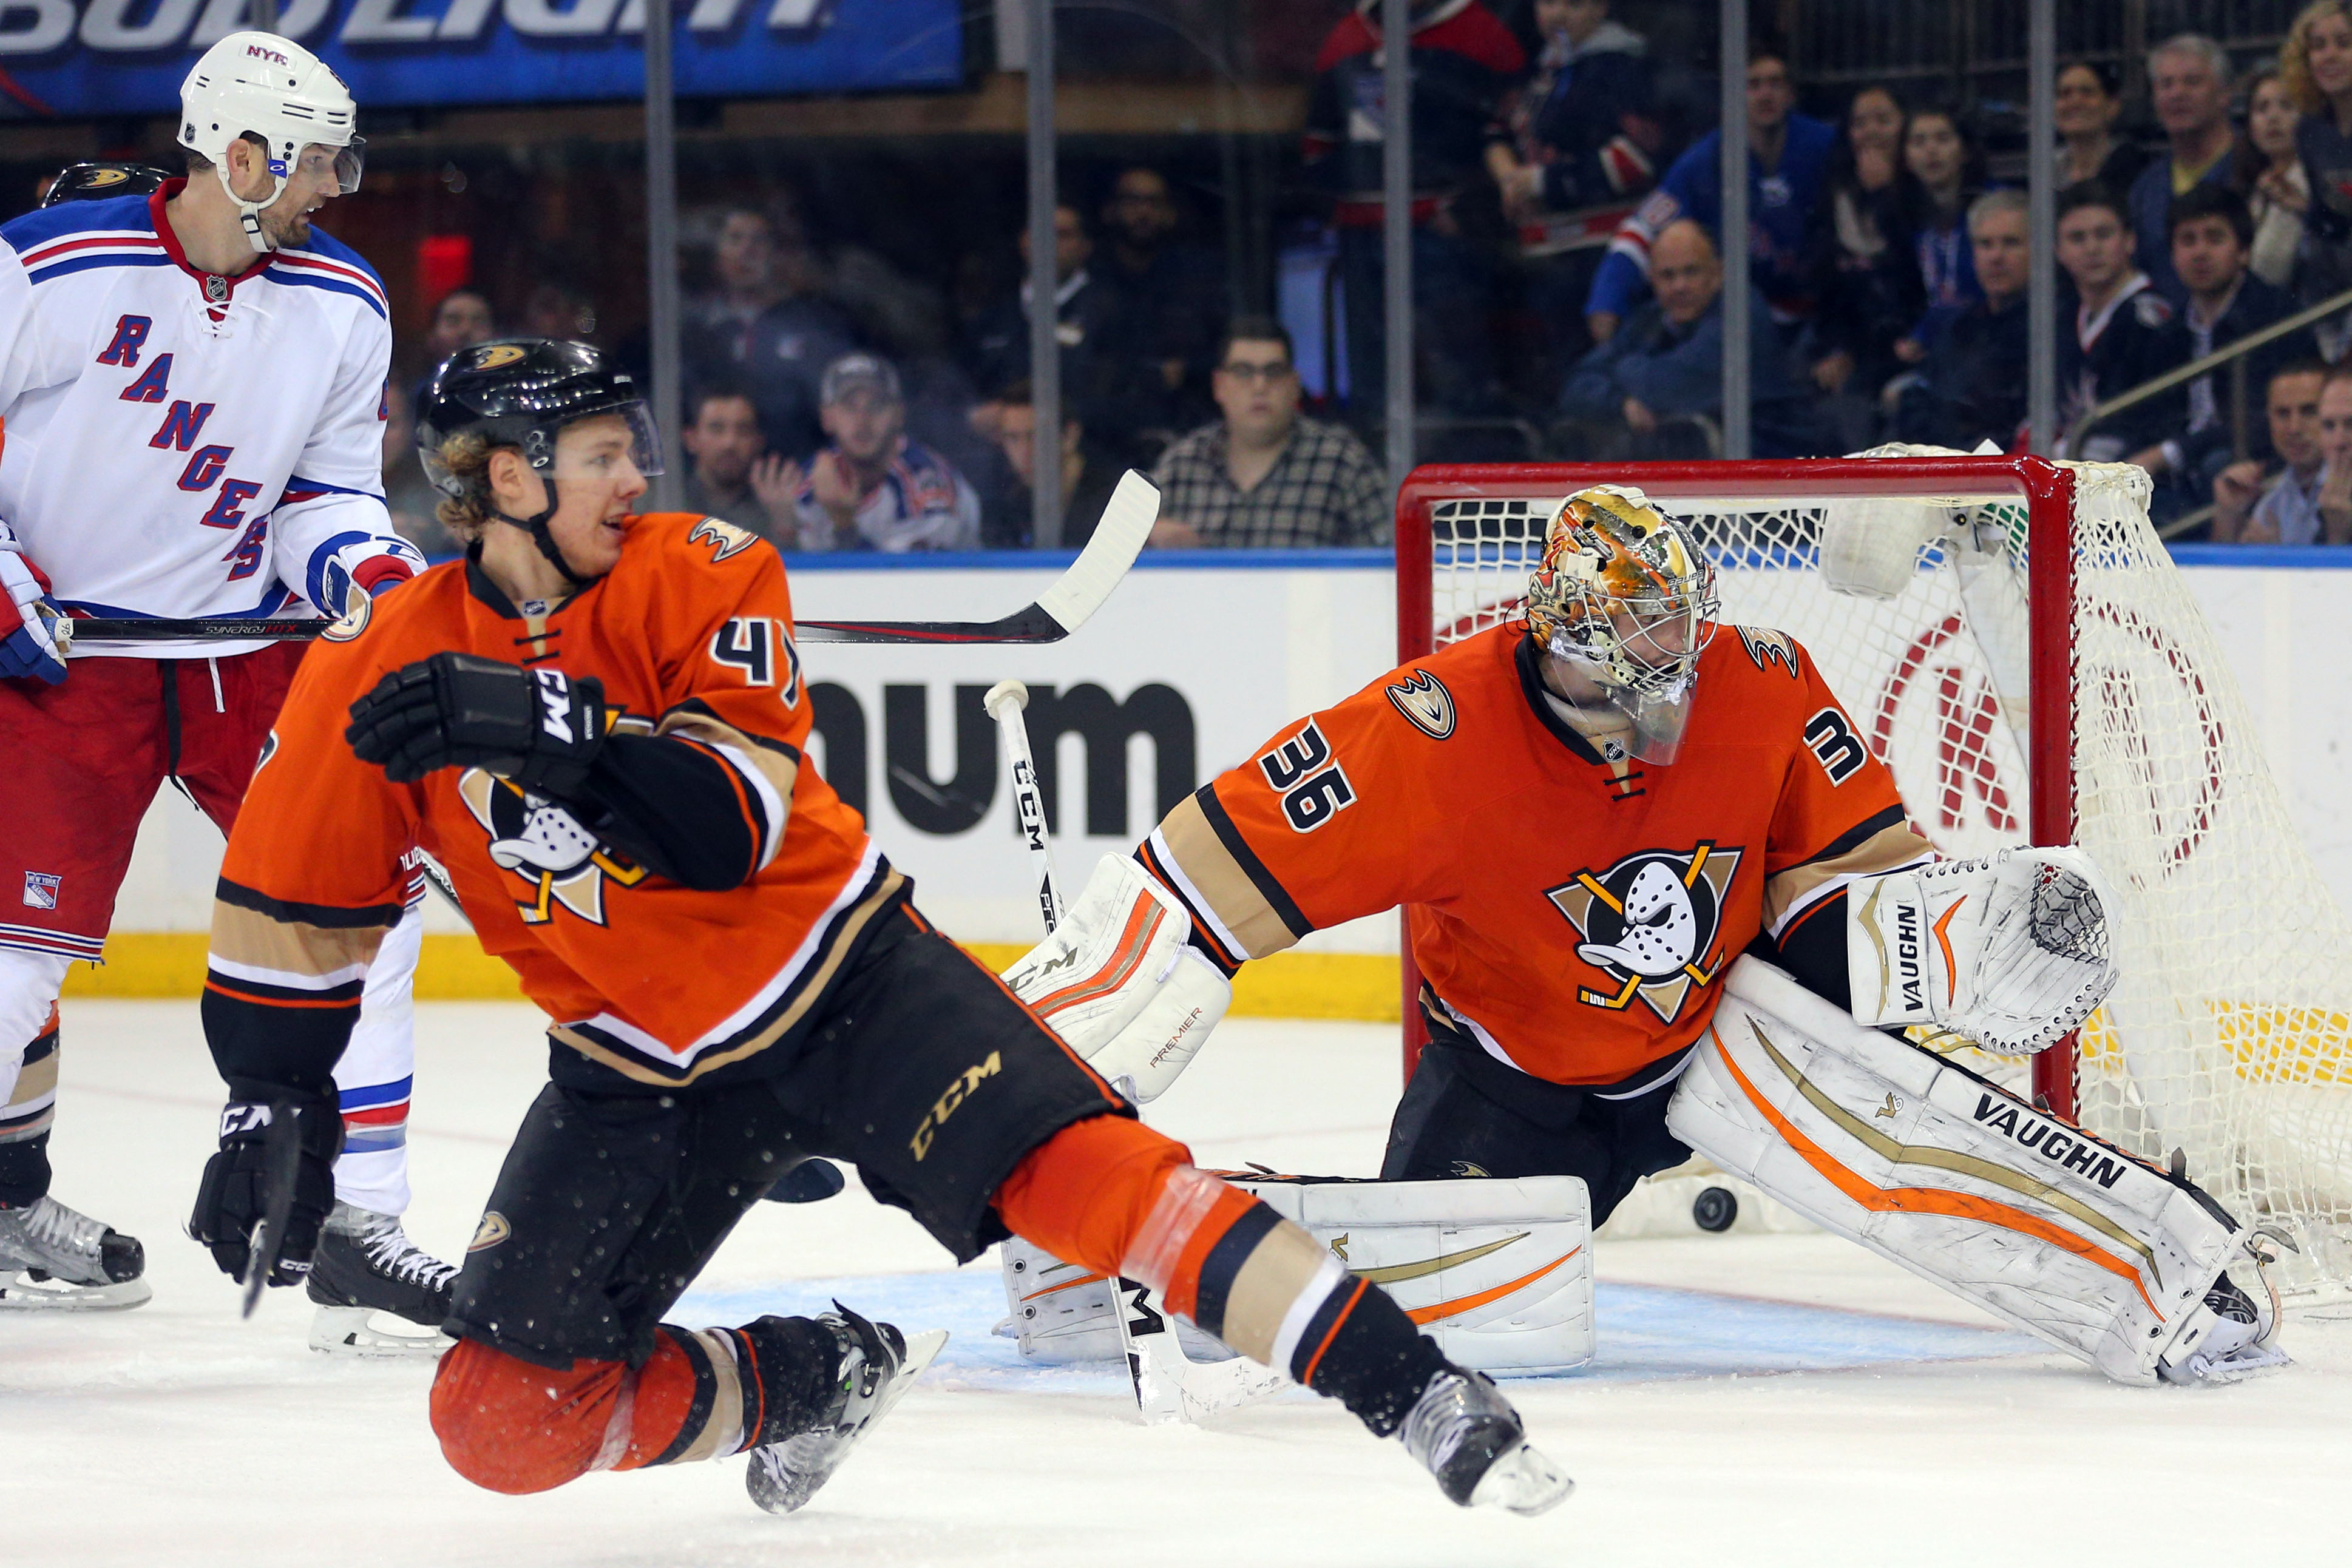 Are The New York Rangers And Anaheim Ducks Close To A Deal? 3